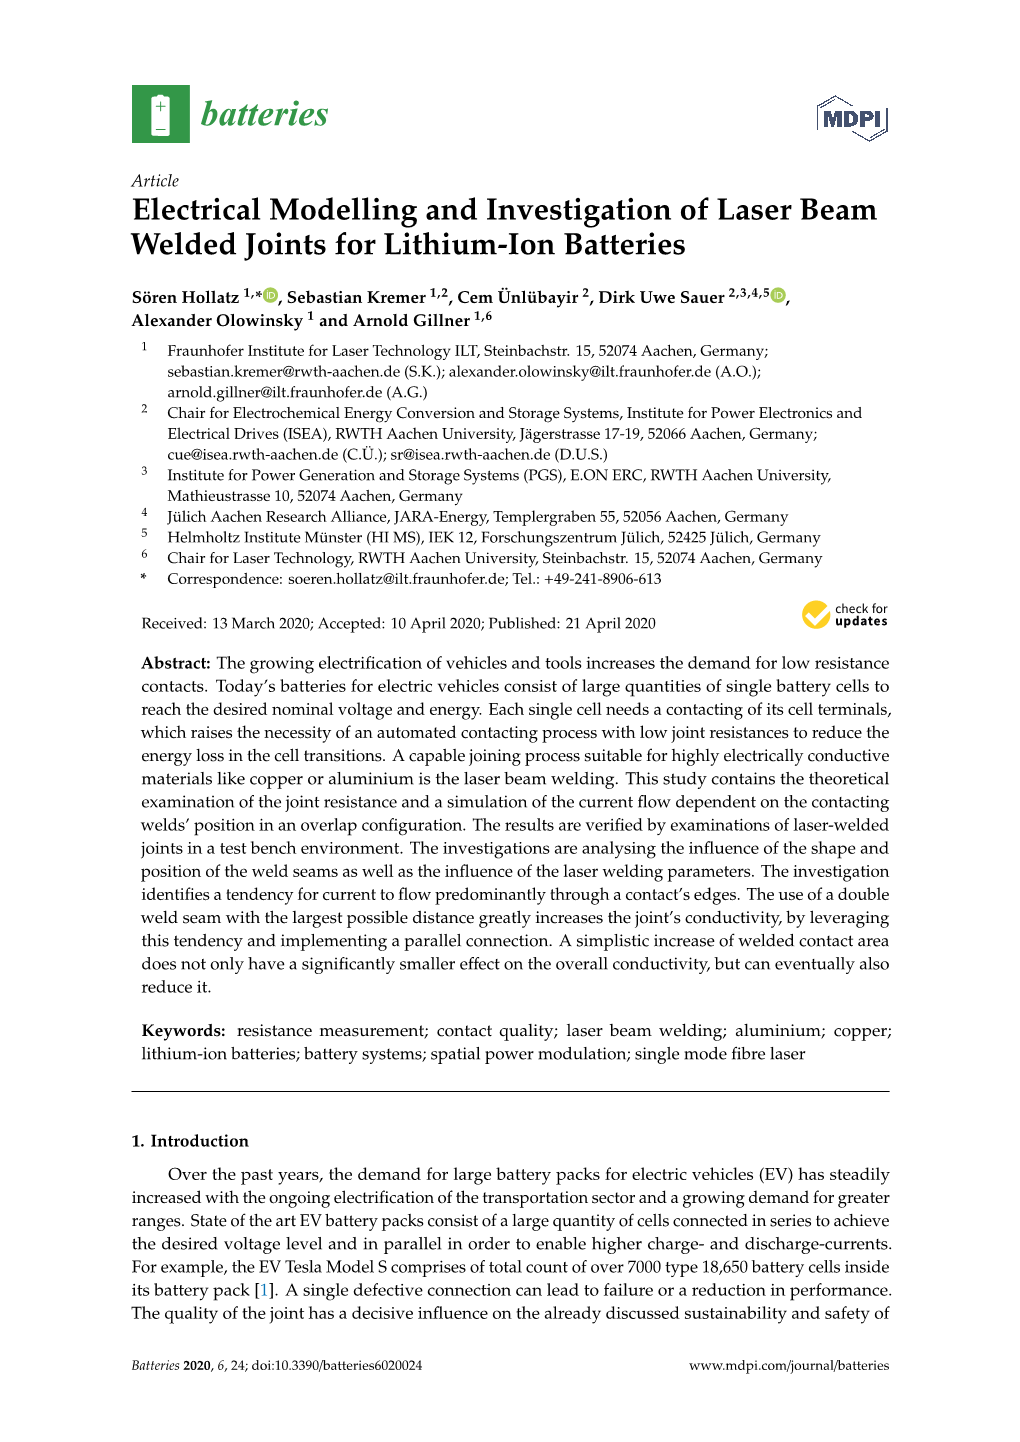 Electrical Modelling and Investigation of Laser Beam Welded Joints for Lithium-Ion Batteries